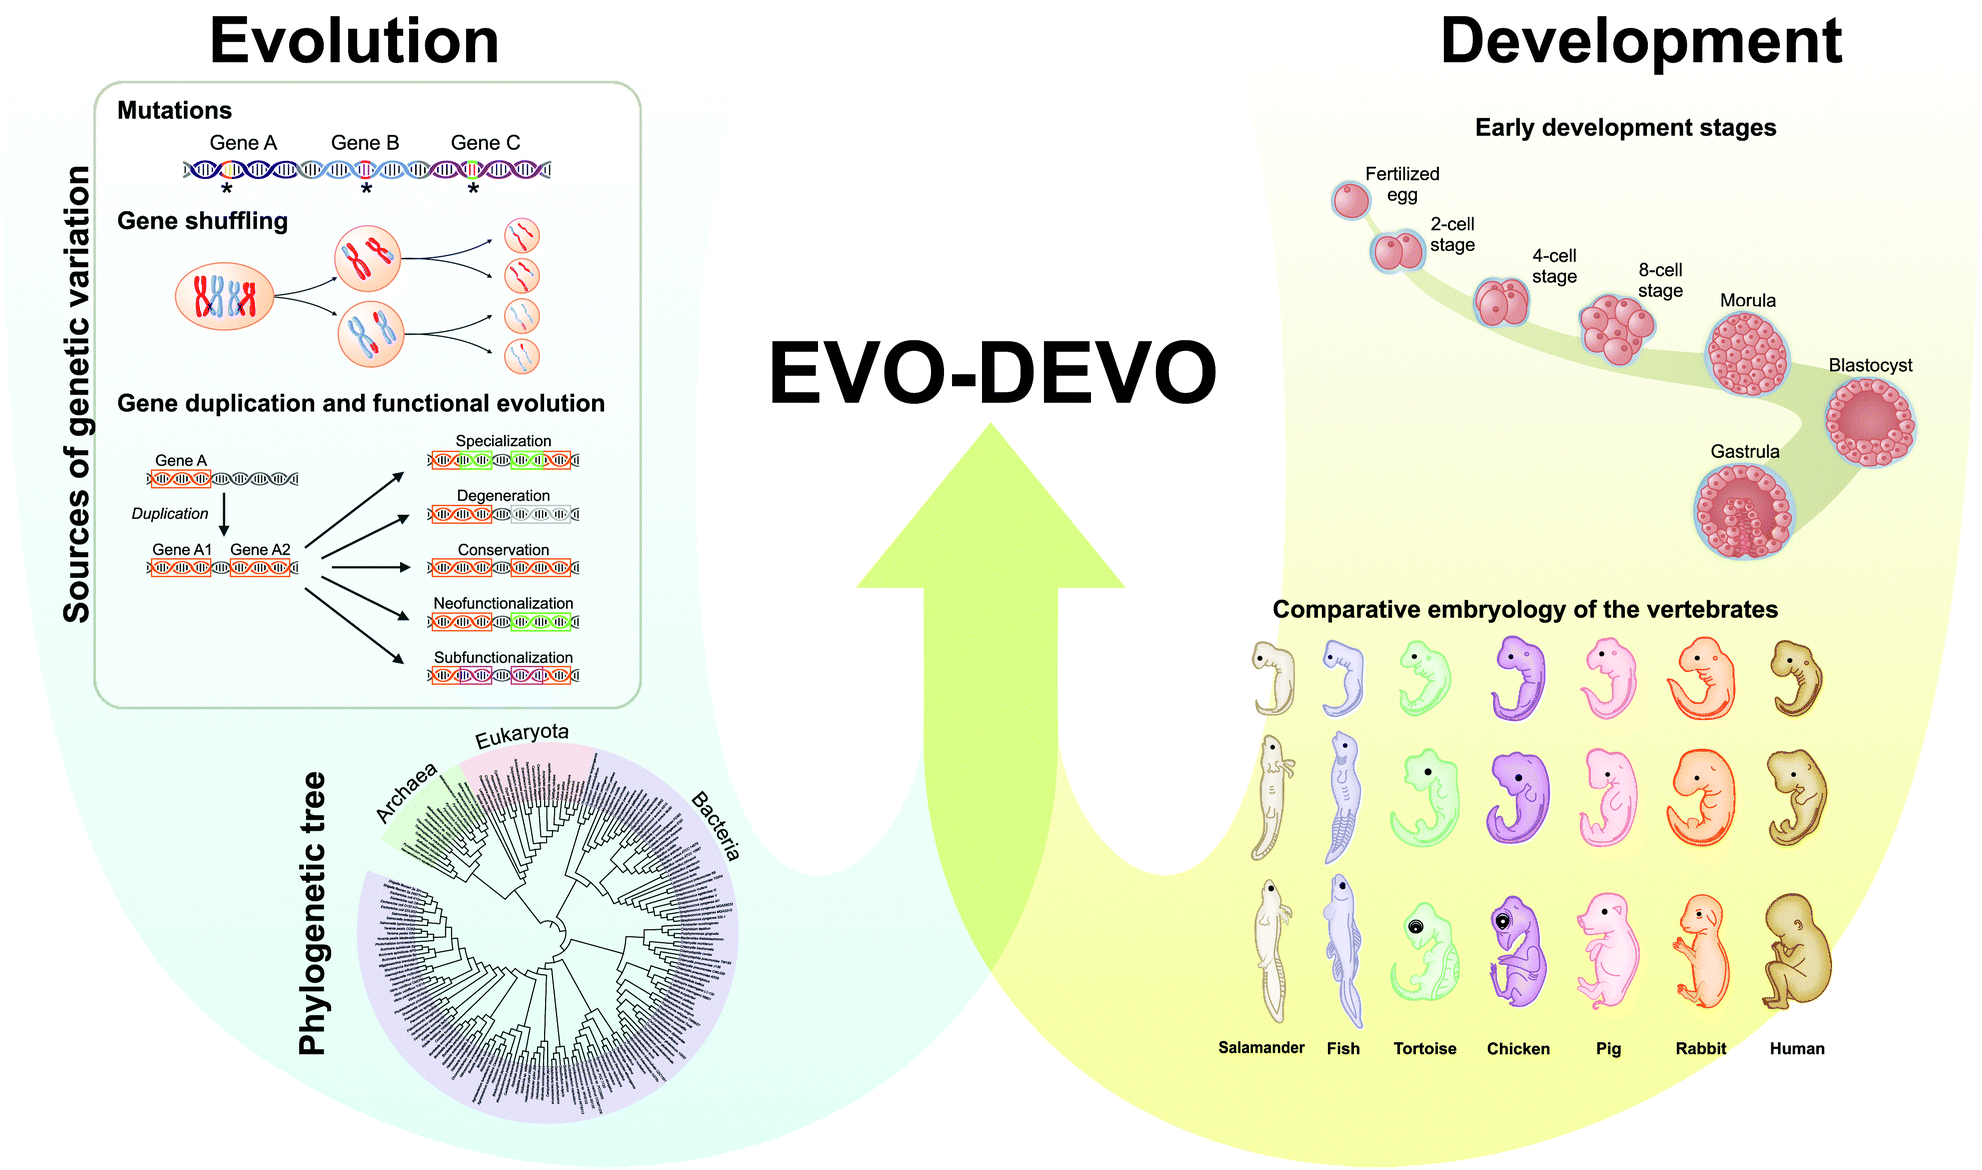 Perspectives and applications of machine learning for evolutionary developmental biology